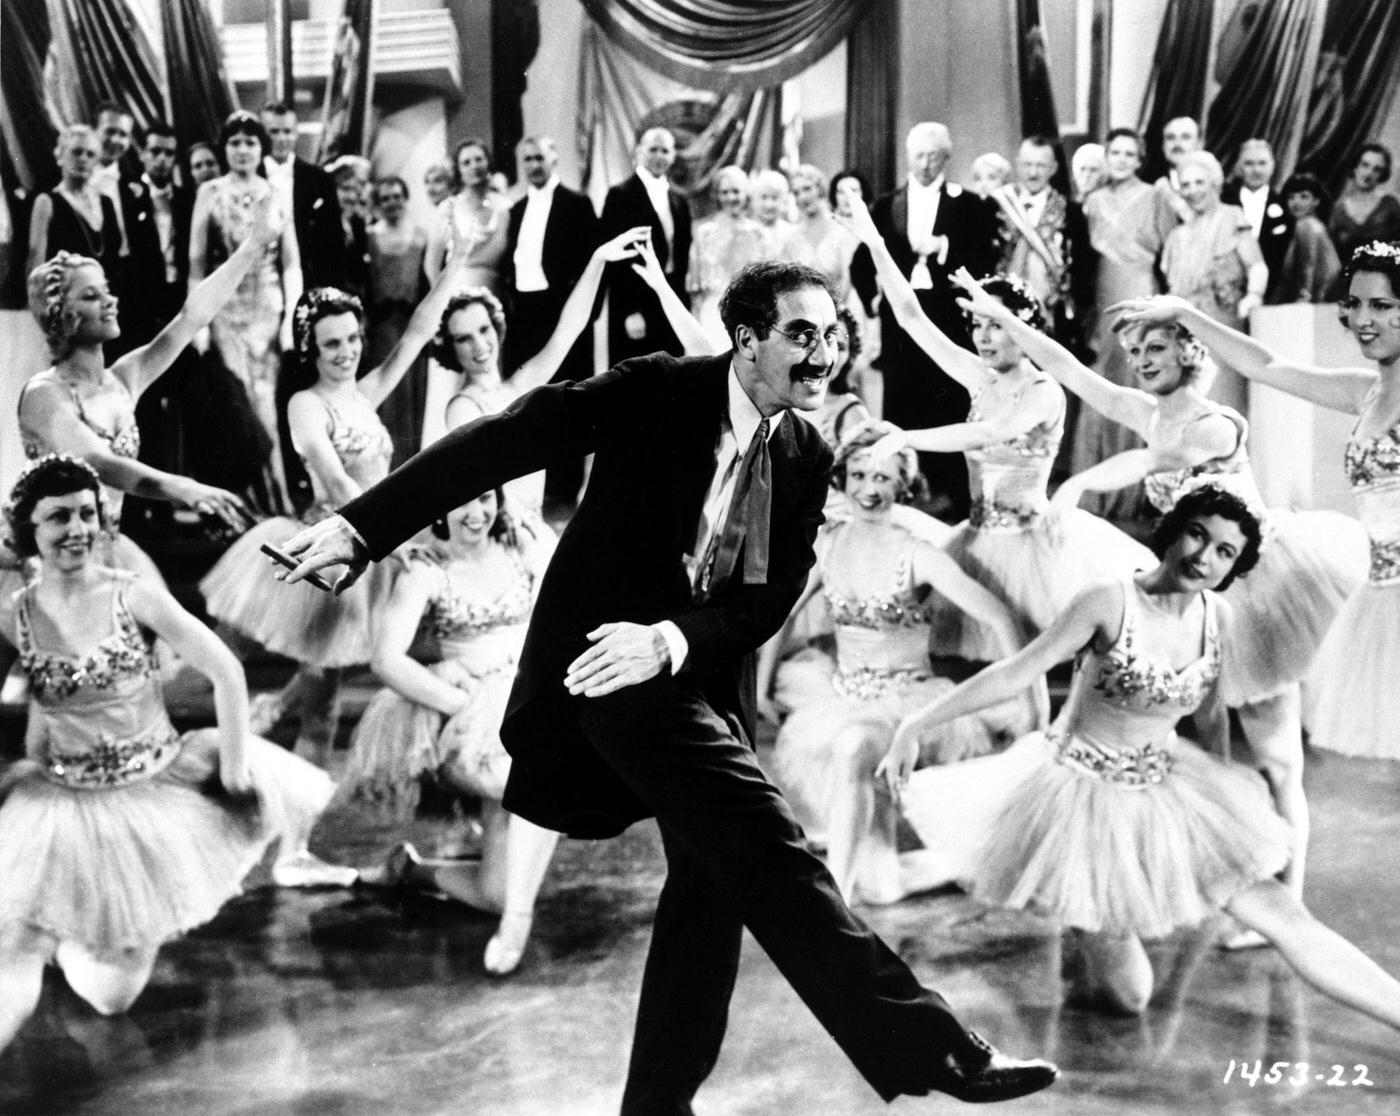 Groucho Marx dances with ballerinas in a scene from Duck Soup (1933) in Los Angeles, California.